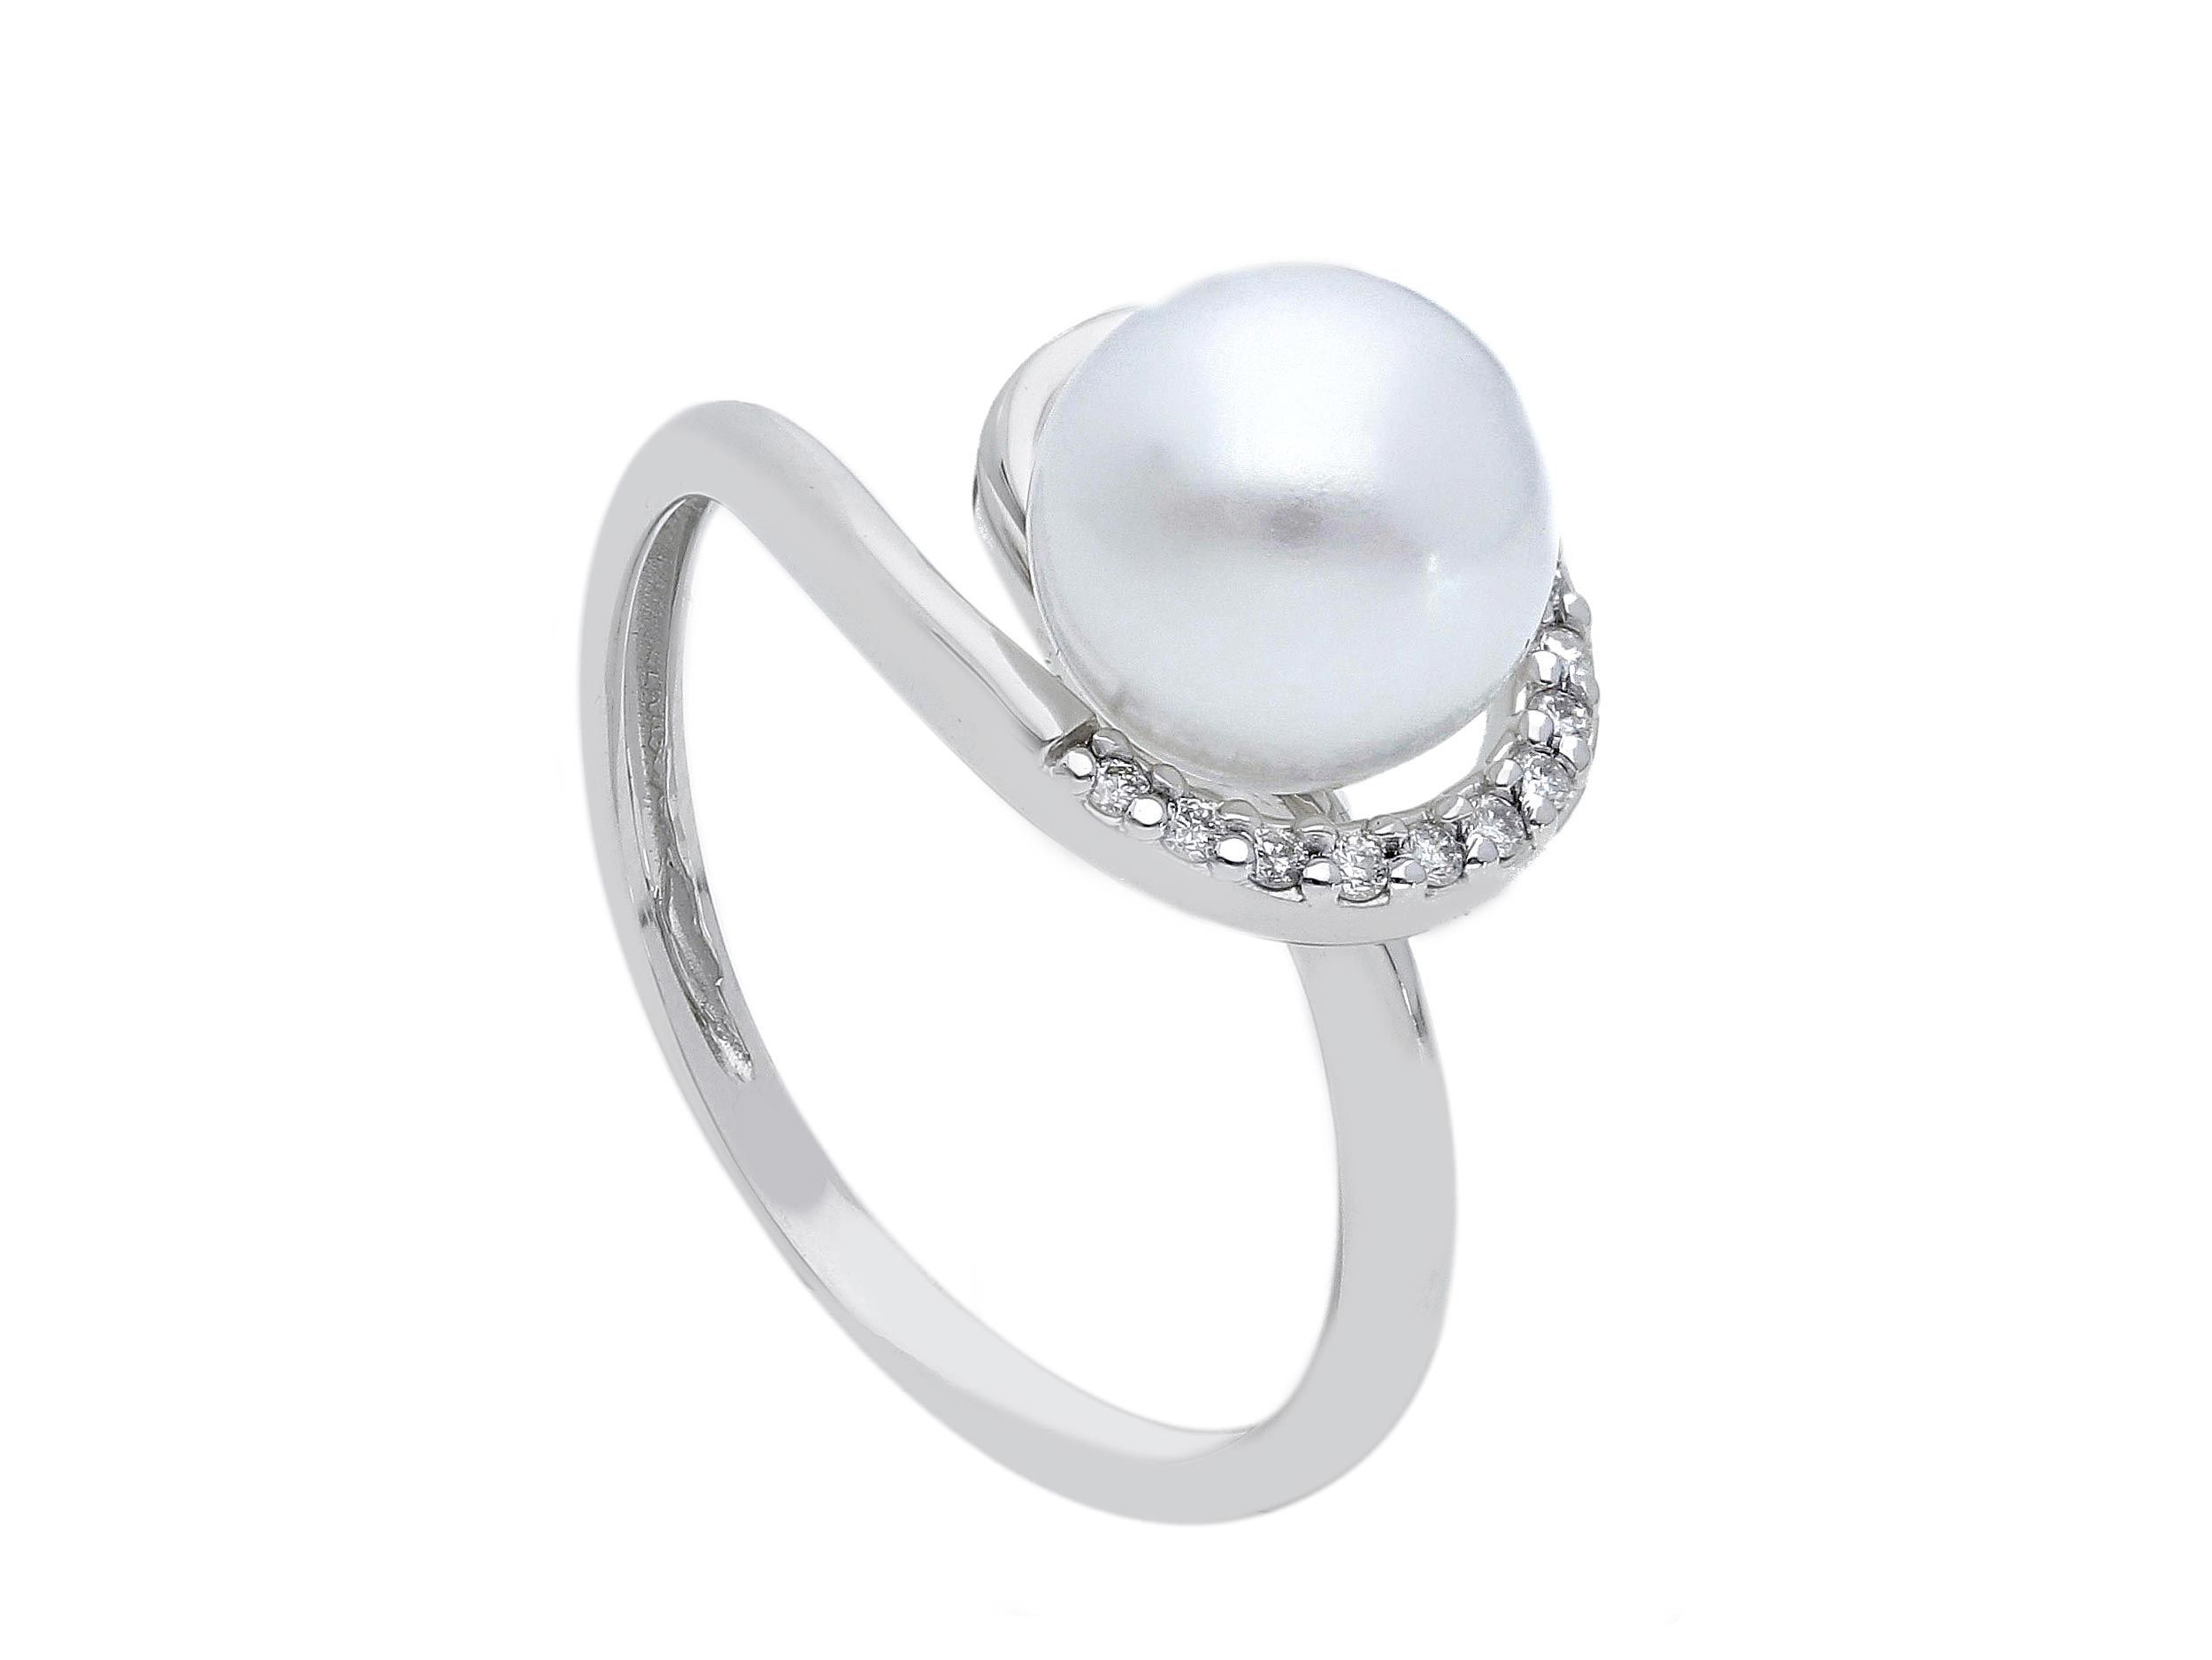  White gold ring k18 with diamonds αnd pearl (code S253225)